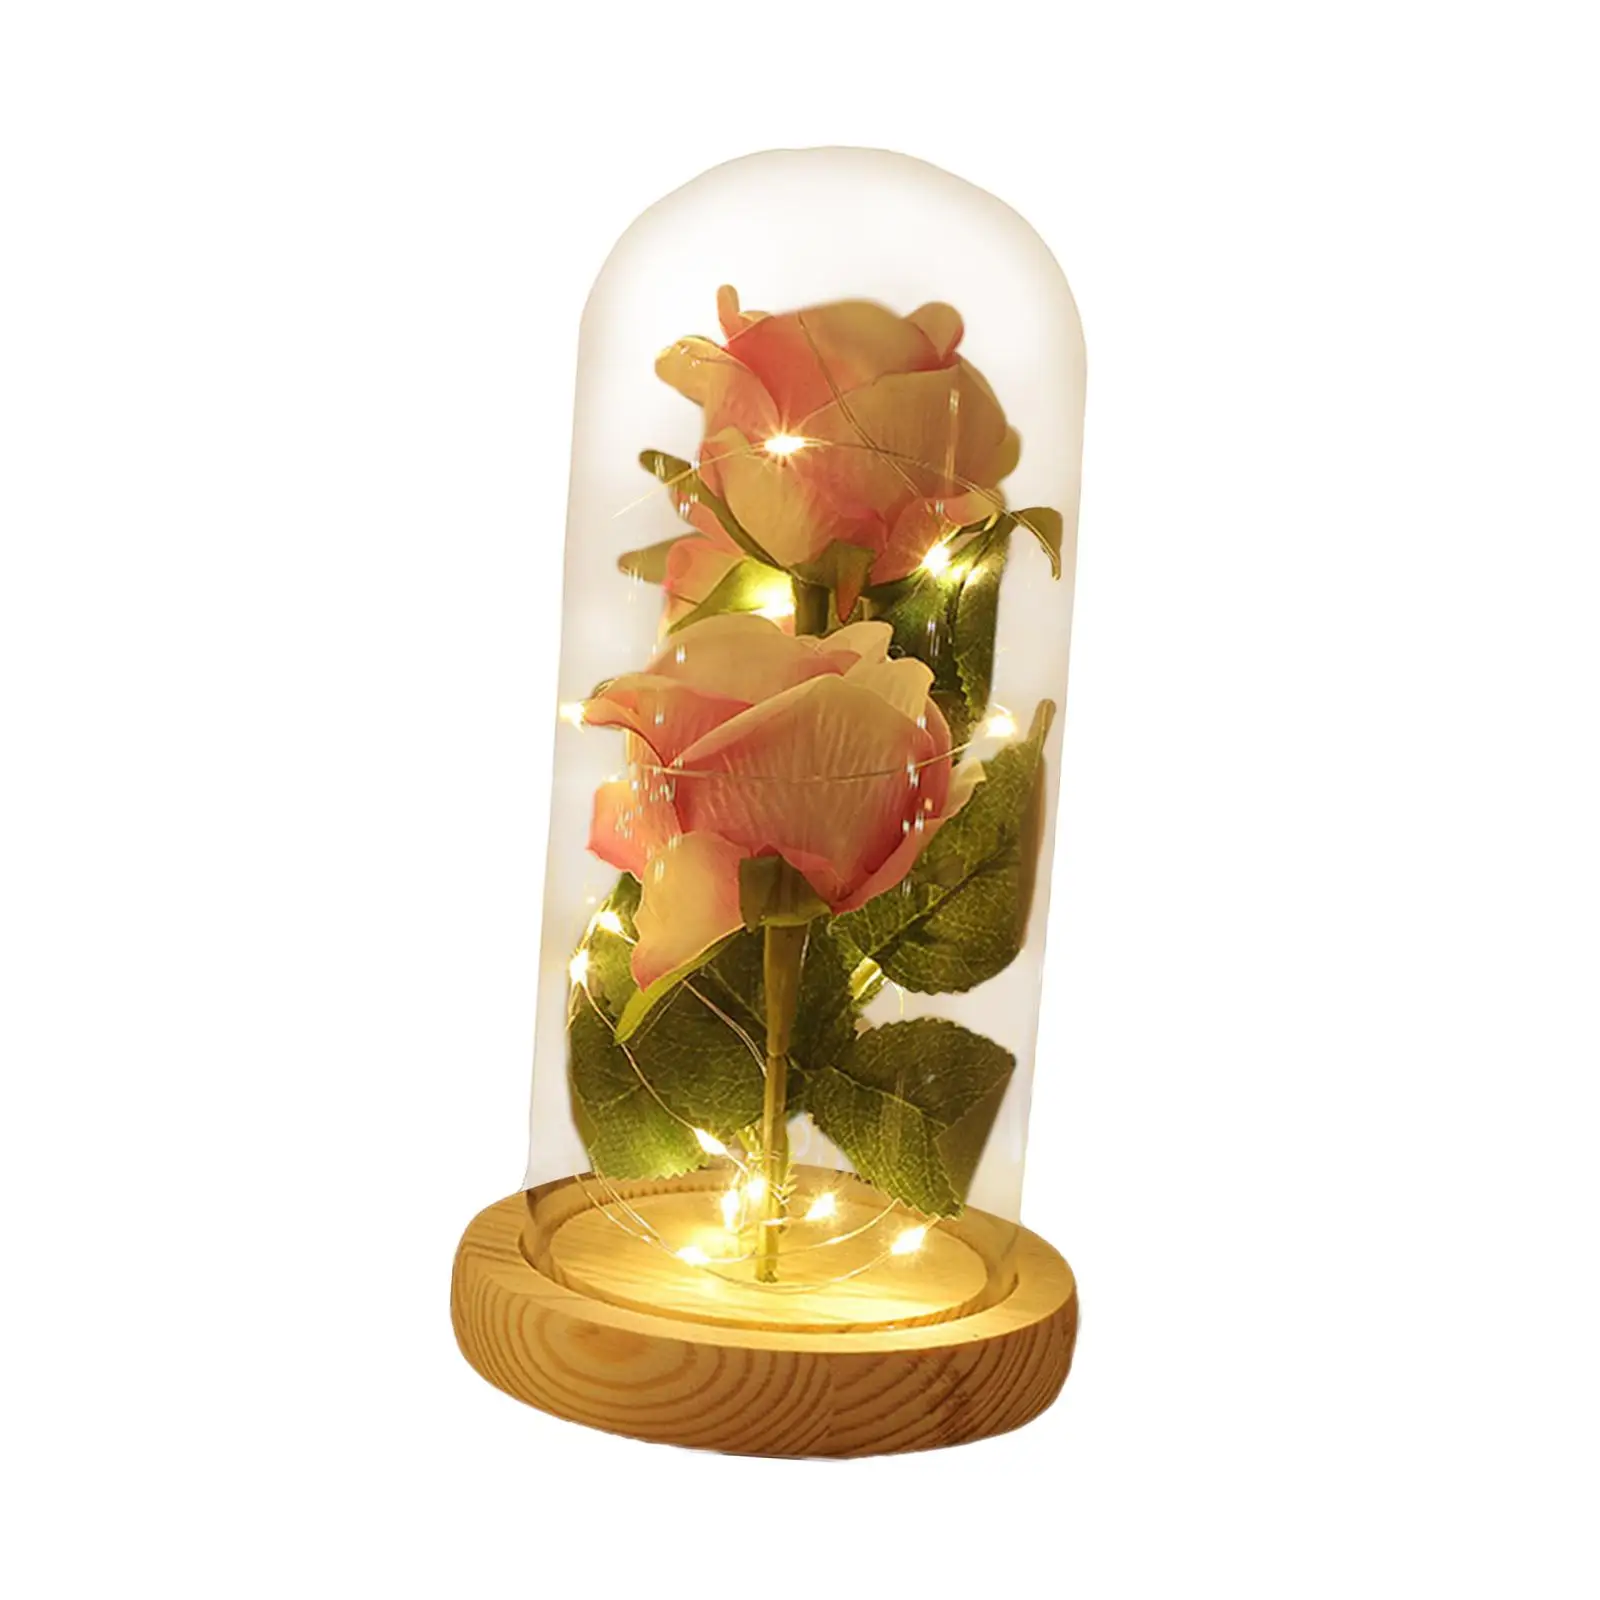 Artificial Rose Flower with Glass Cover Lifelike Flower for Gift Party Table